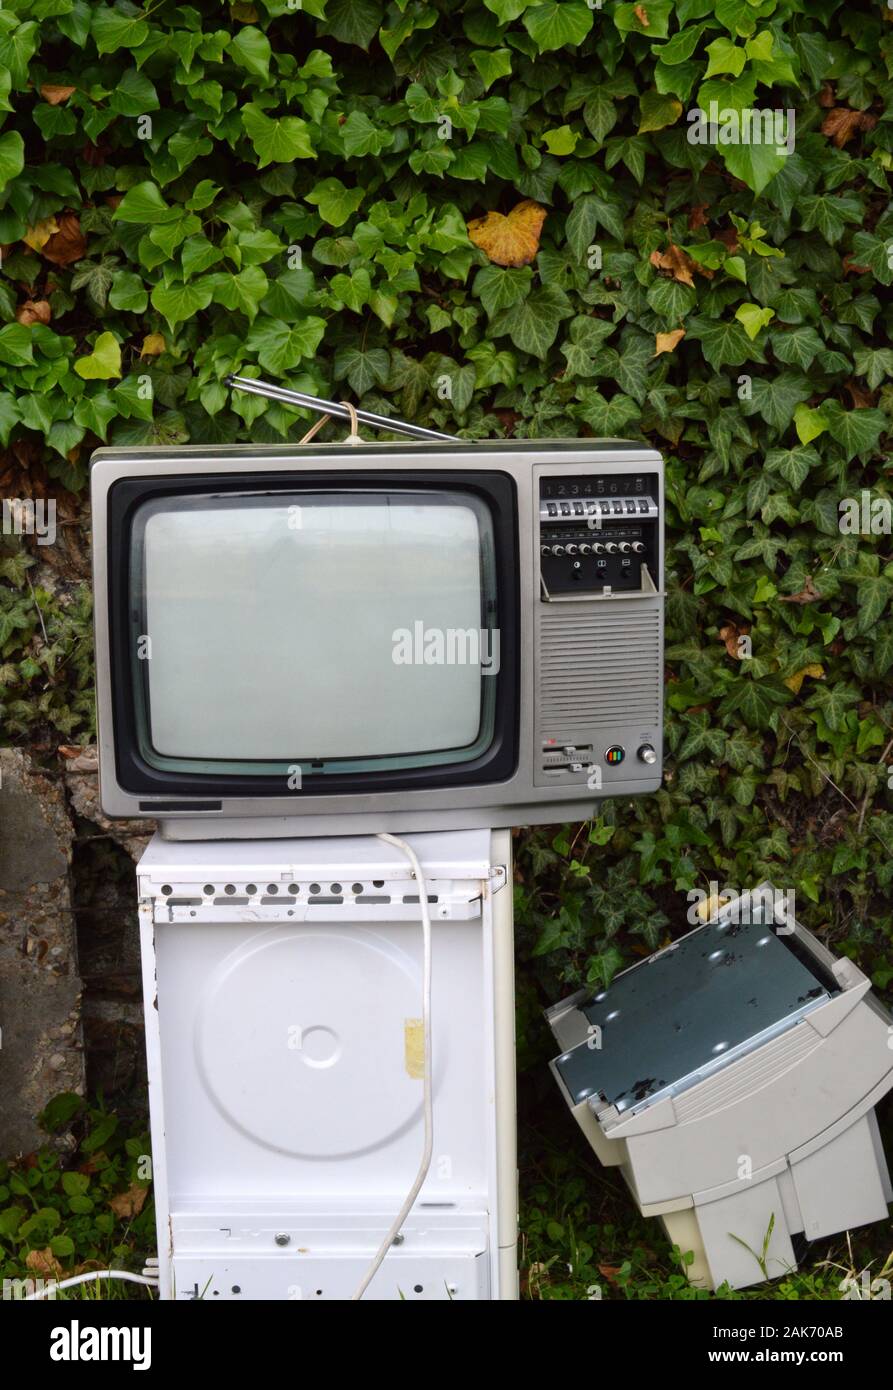 Electronic waste, including an obsolete television for the recycling of electronic waste Stock Photo